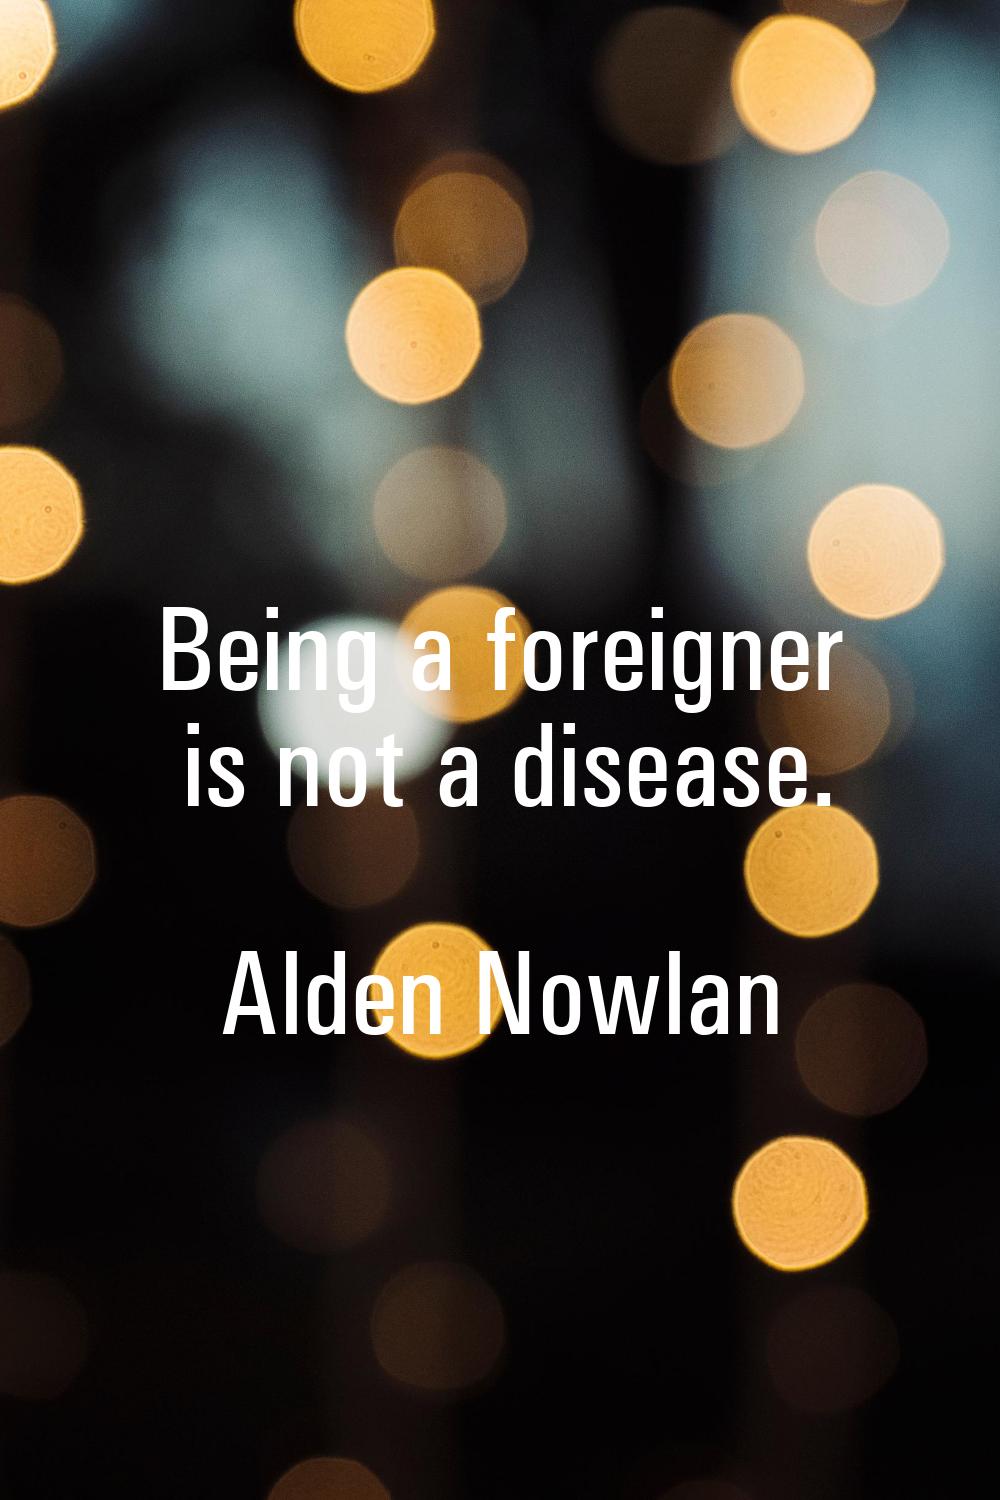 Being a foreigner is not a disease.